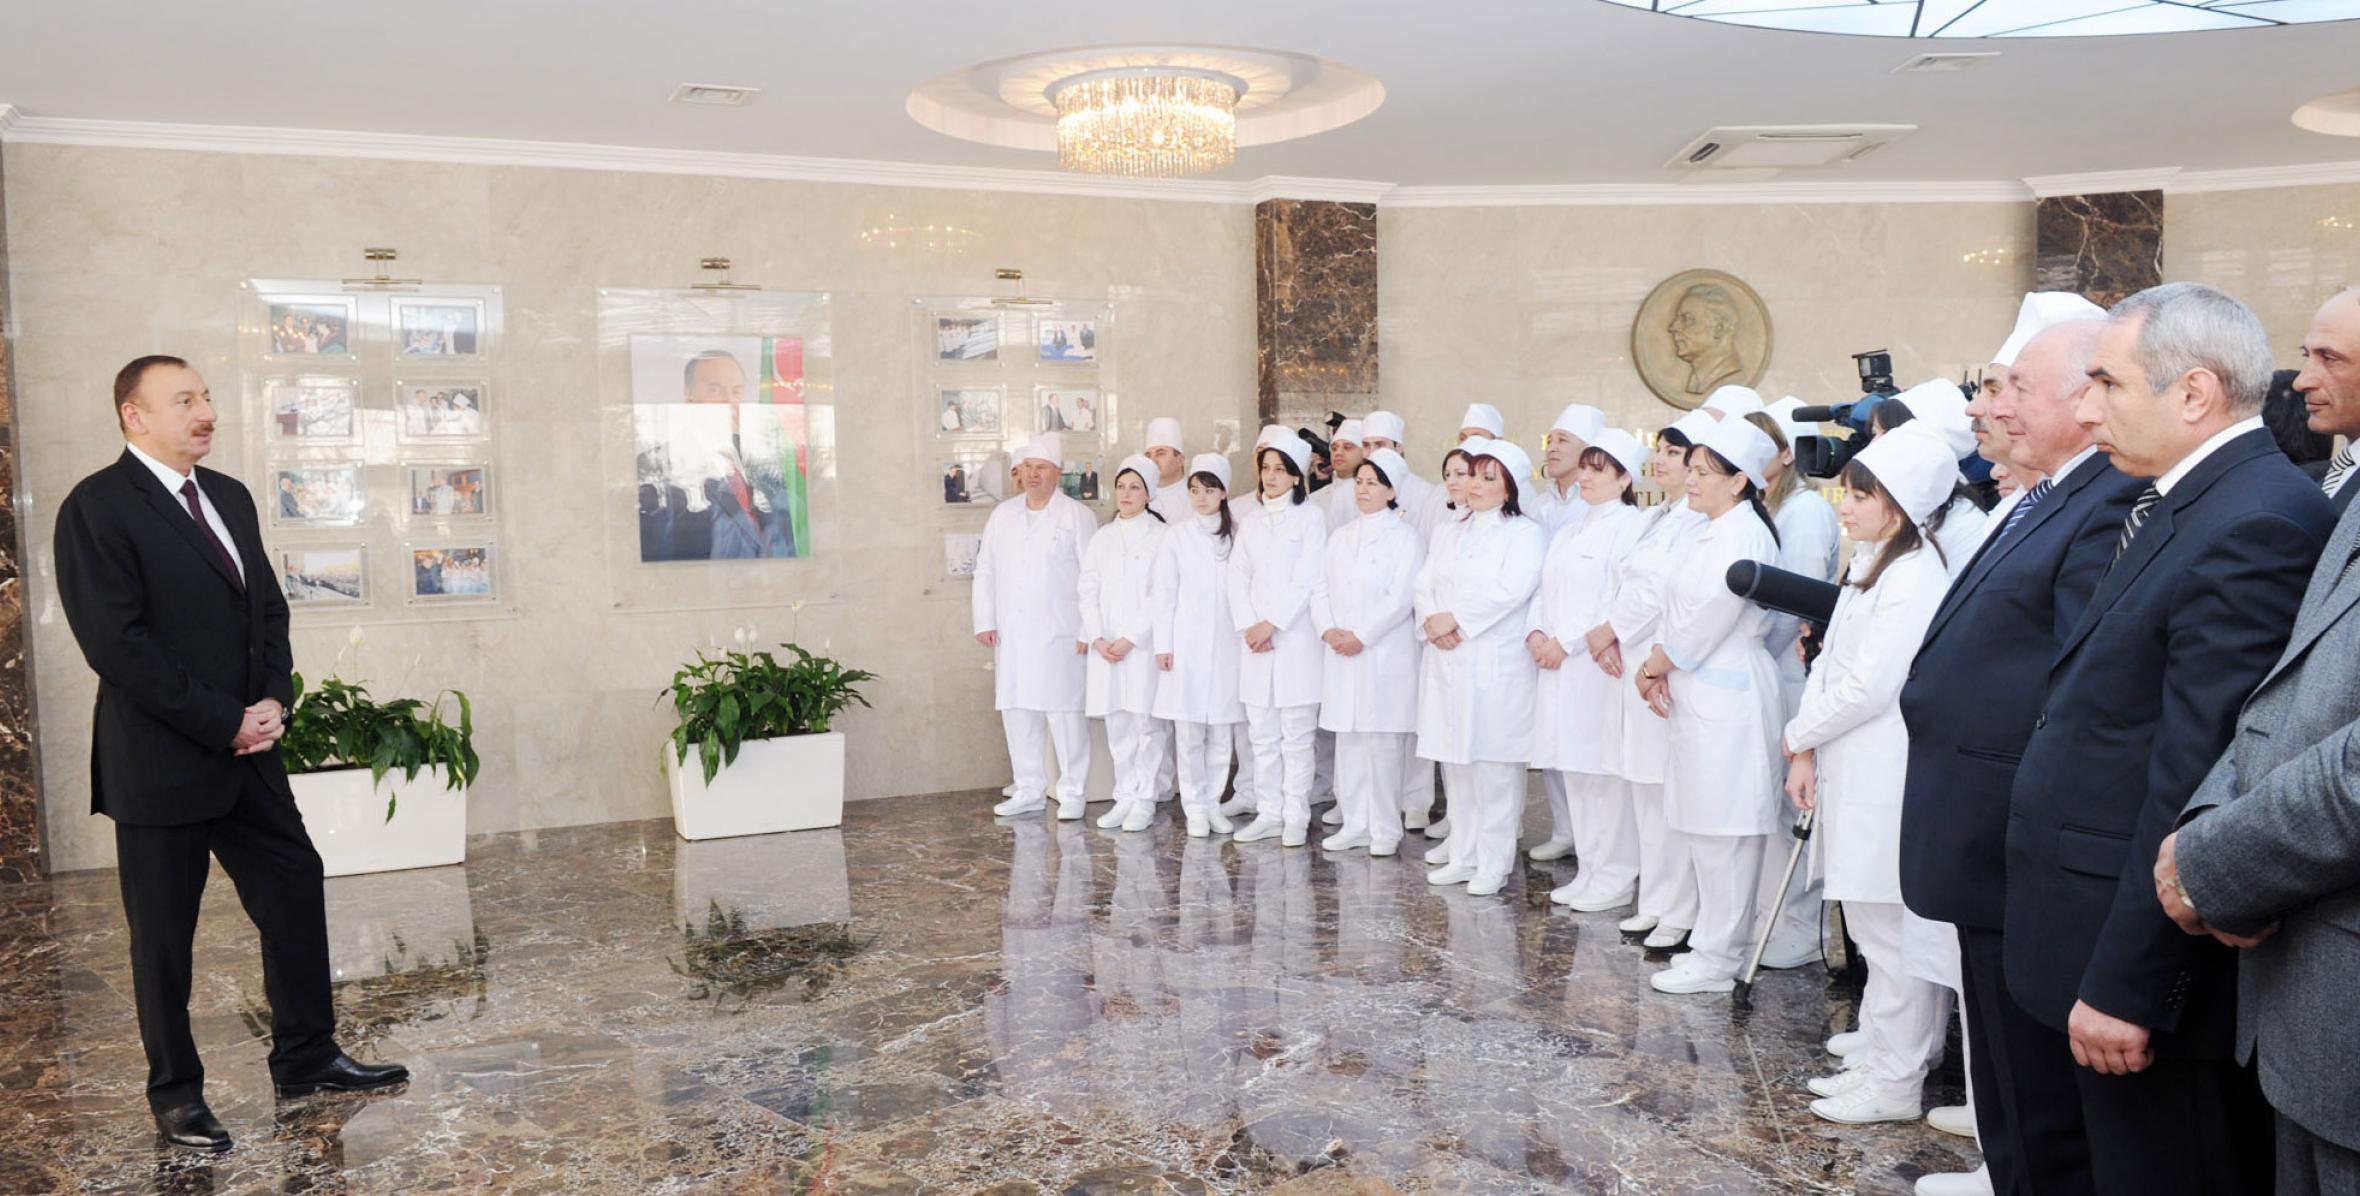 Speech by Ilham Aliyev at the opening of the Central Hospital in Gusar District